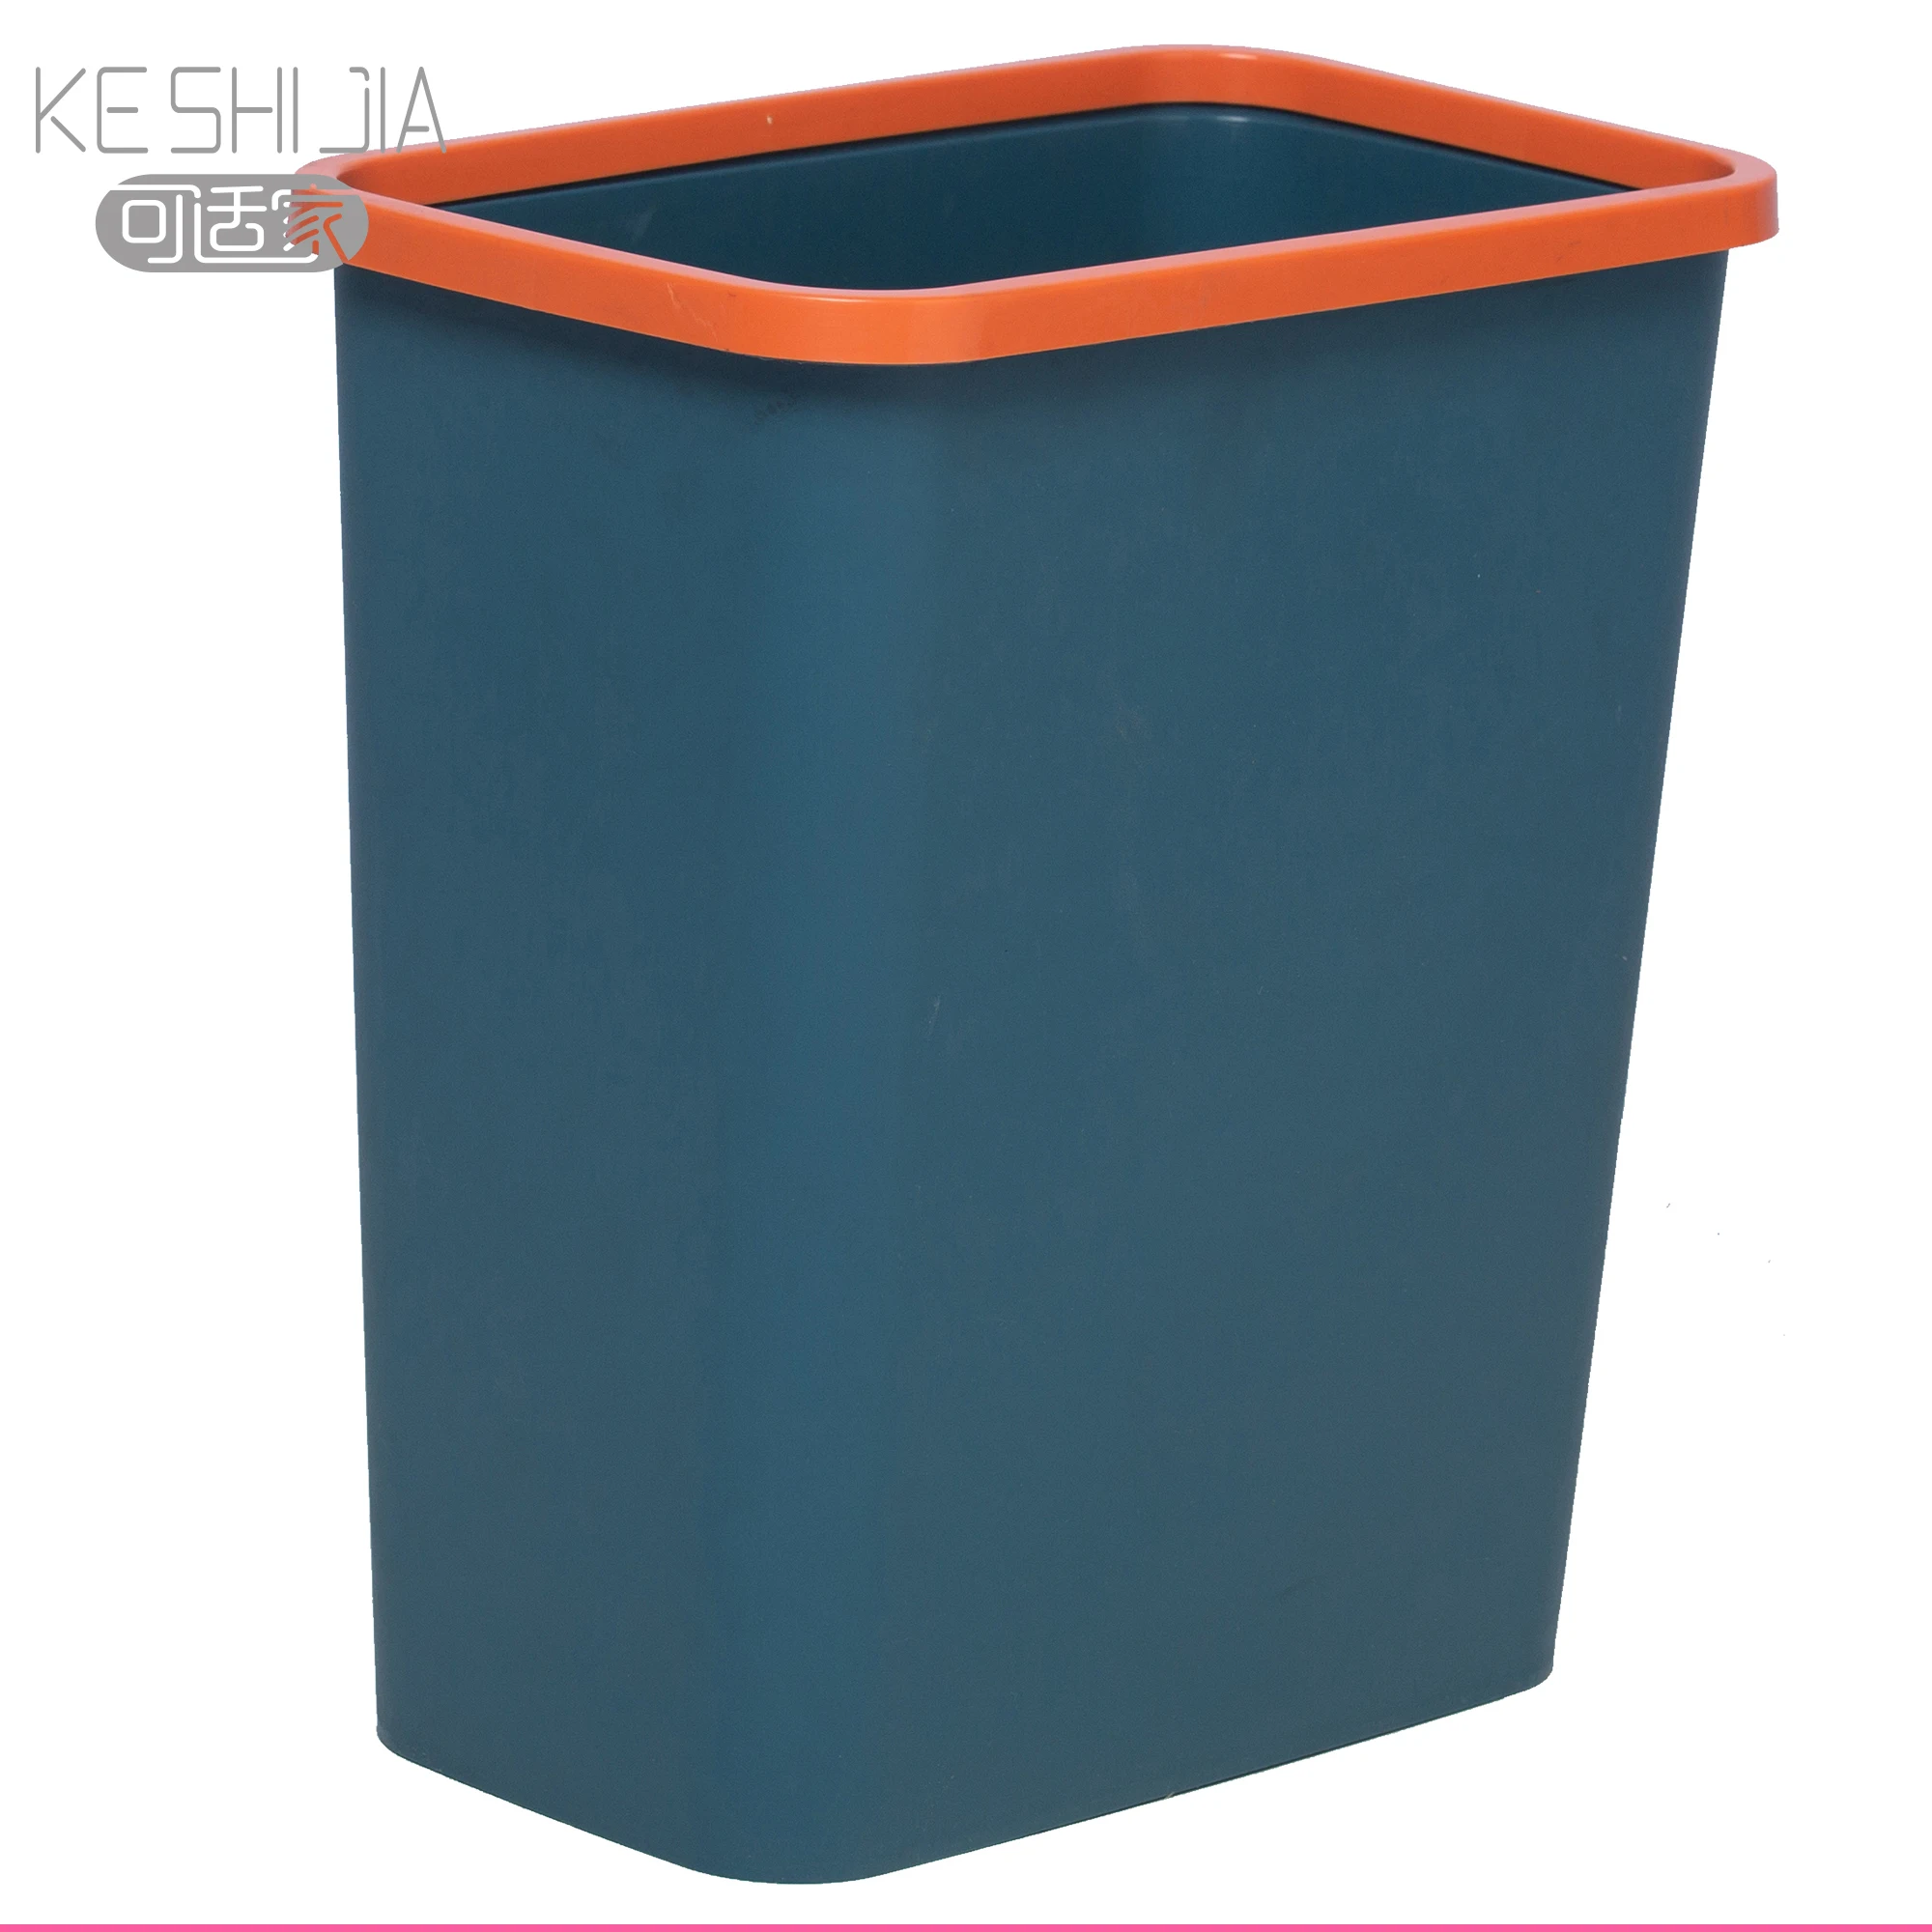 DUSTBINS  Wet and Dry Dustbin Manufacturer from Pune